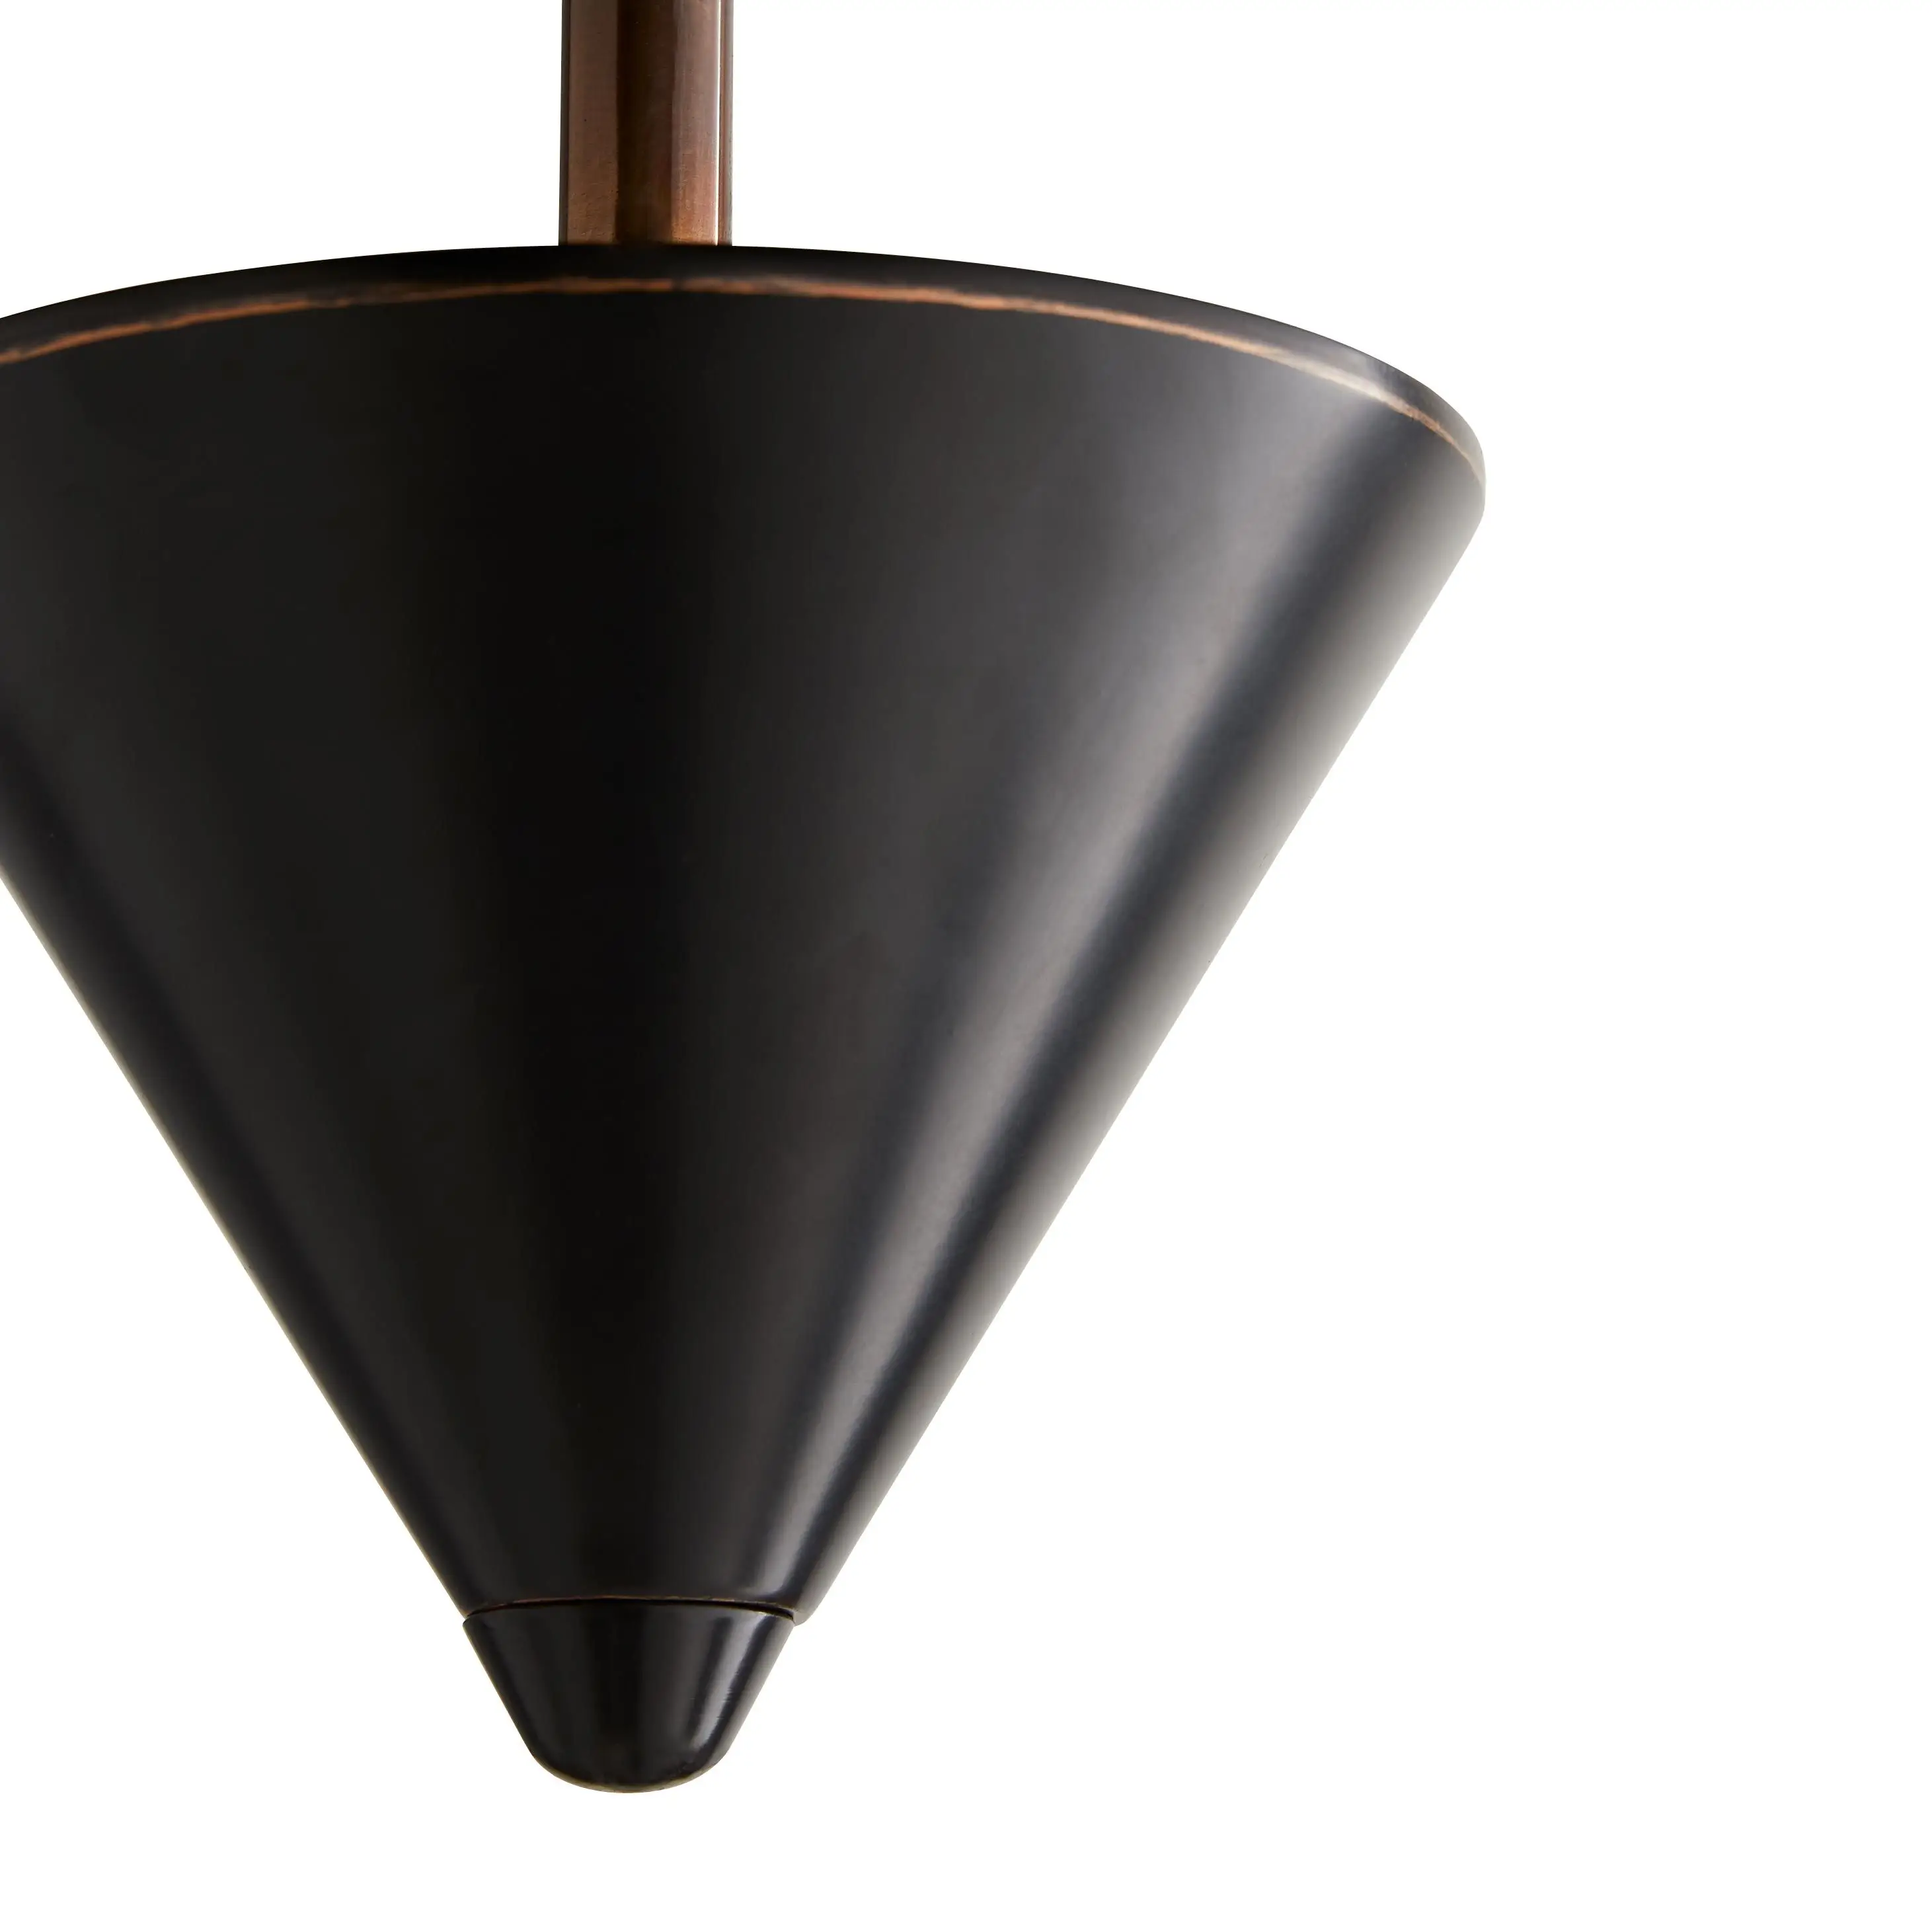 Hanging lamp WALES by Arteriors